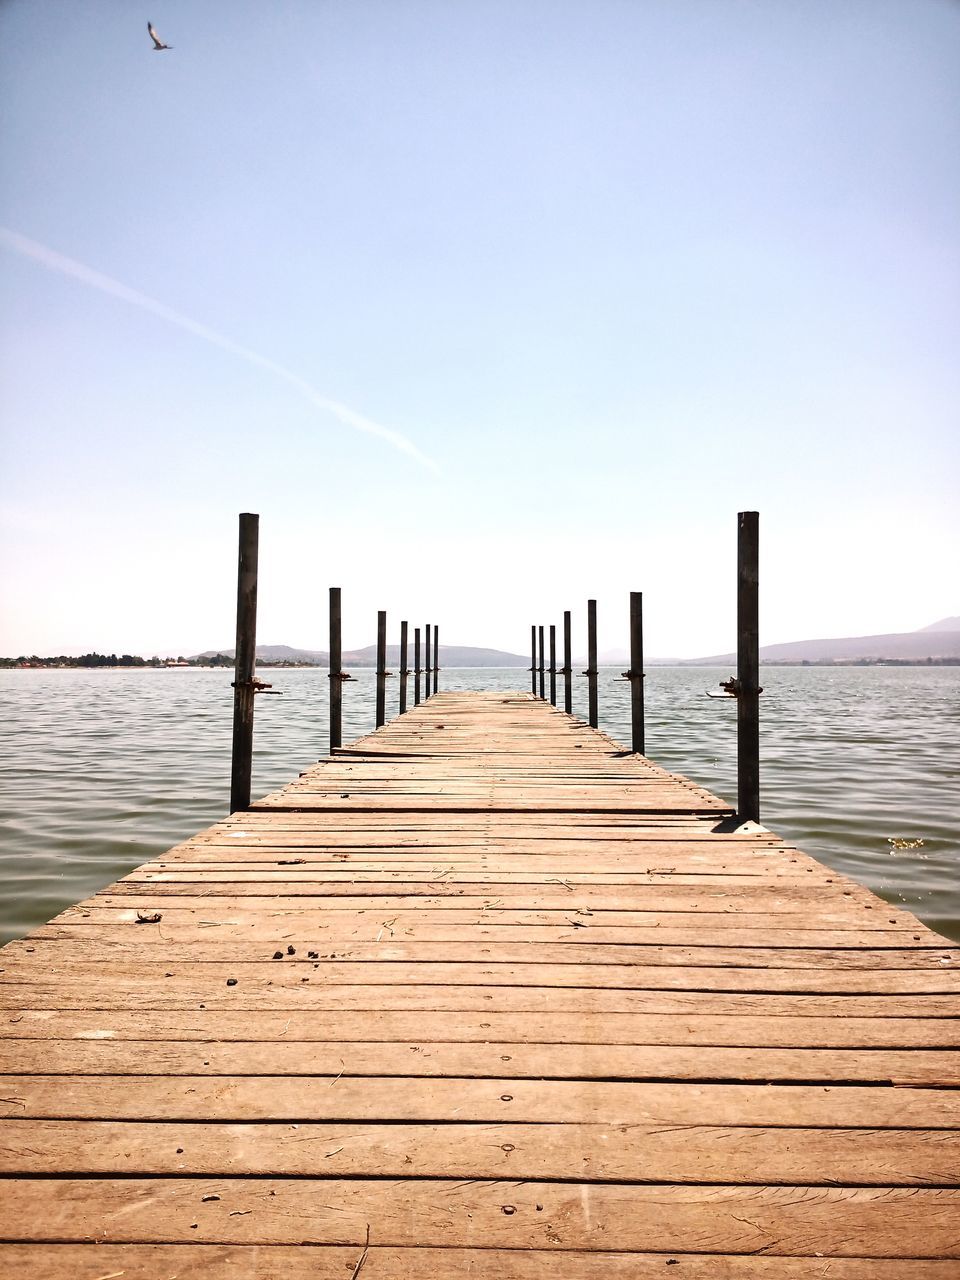 wood, pier, sky, water, horizon, boardwalk, jetty, walkway, nature, sea, tranquility, scenics - nature, beauty in nature, tranquil scene, the way forward, shore, ocean, land, morning, beach, coast, sunlight, landscape, summer, architecture, no people, diminishing perspective, footpath, clear sky, outdoors, dock, horizon over water, day, copy space, reflection, holiday, relaxation, idyllic, wooden post, post, environment, seascape, blue, travel destinations, sunny, urban skyline, built structure, trip, vacation, vanishing point, travel, empty, cloud, non-urban scene, wood paneling, sand